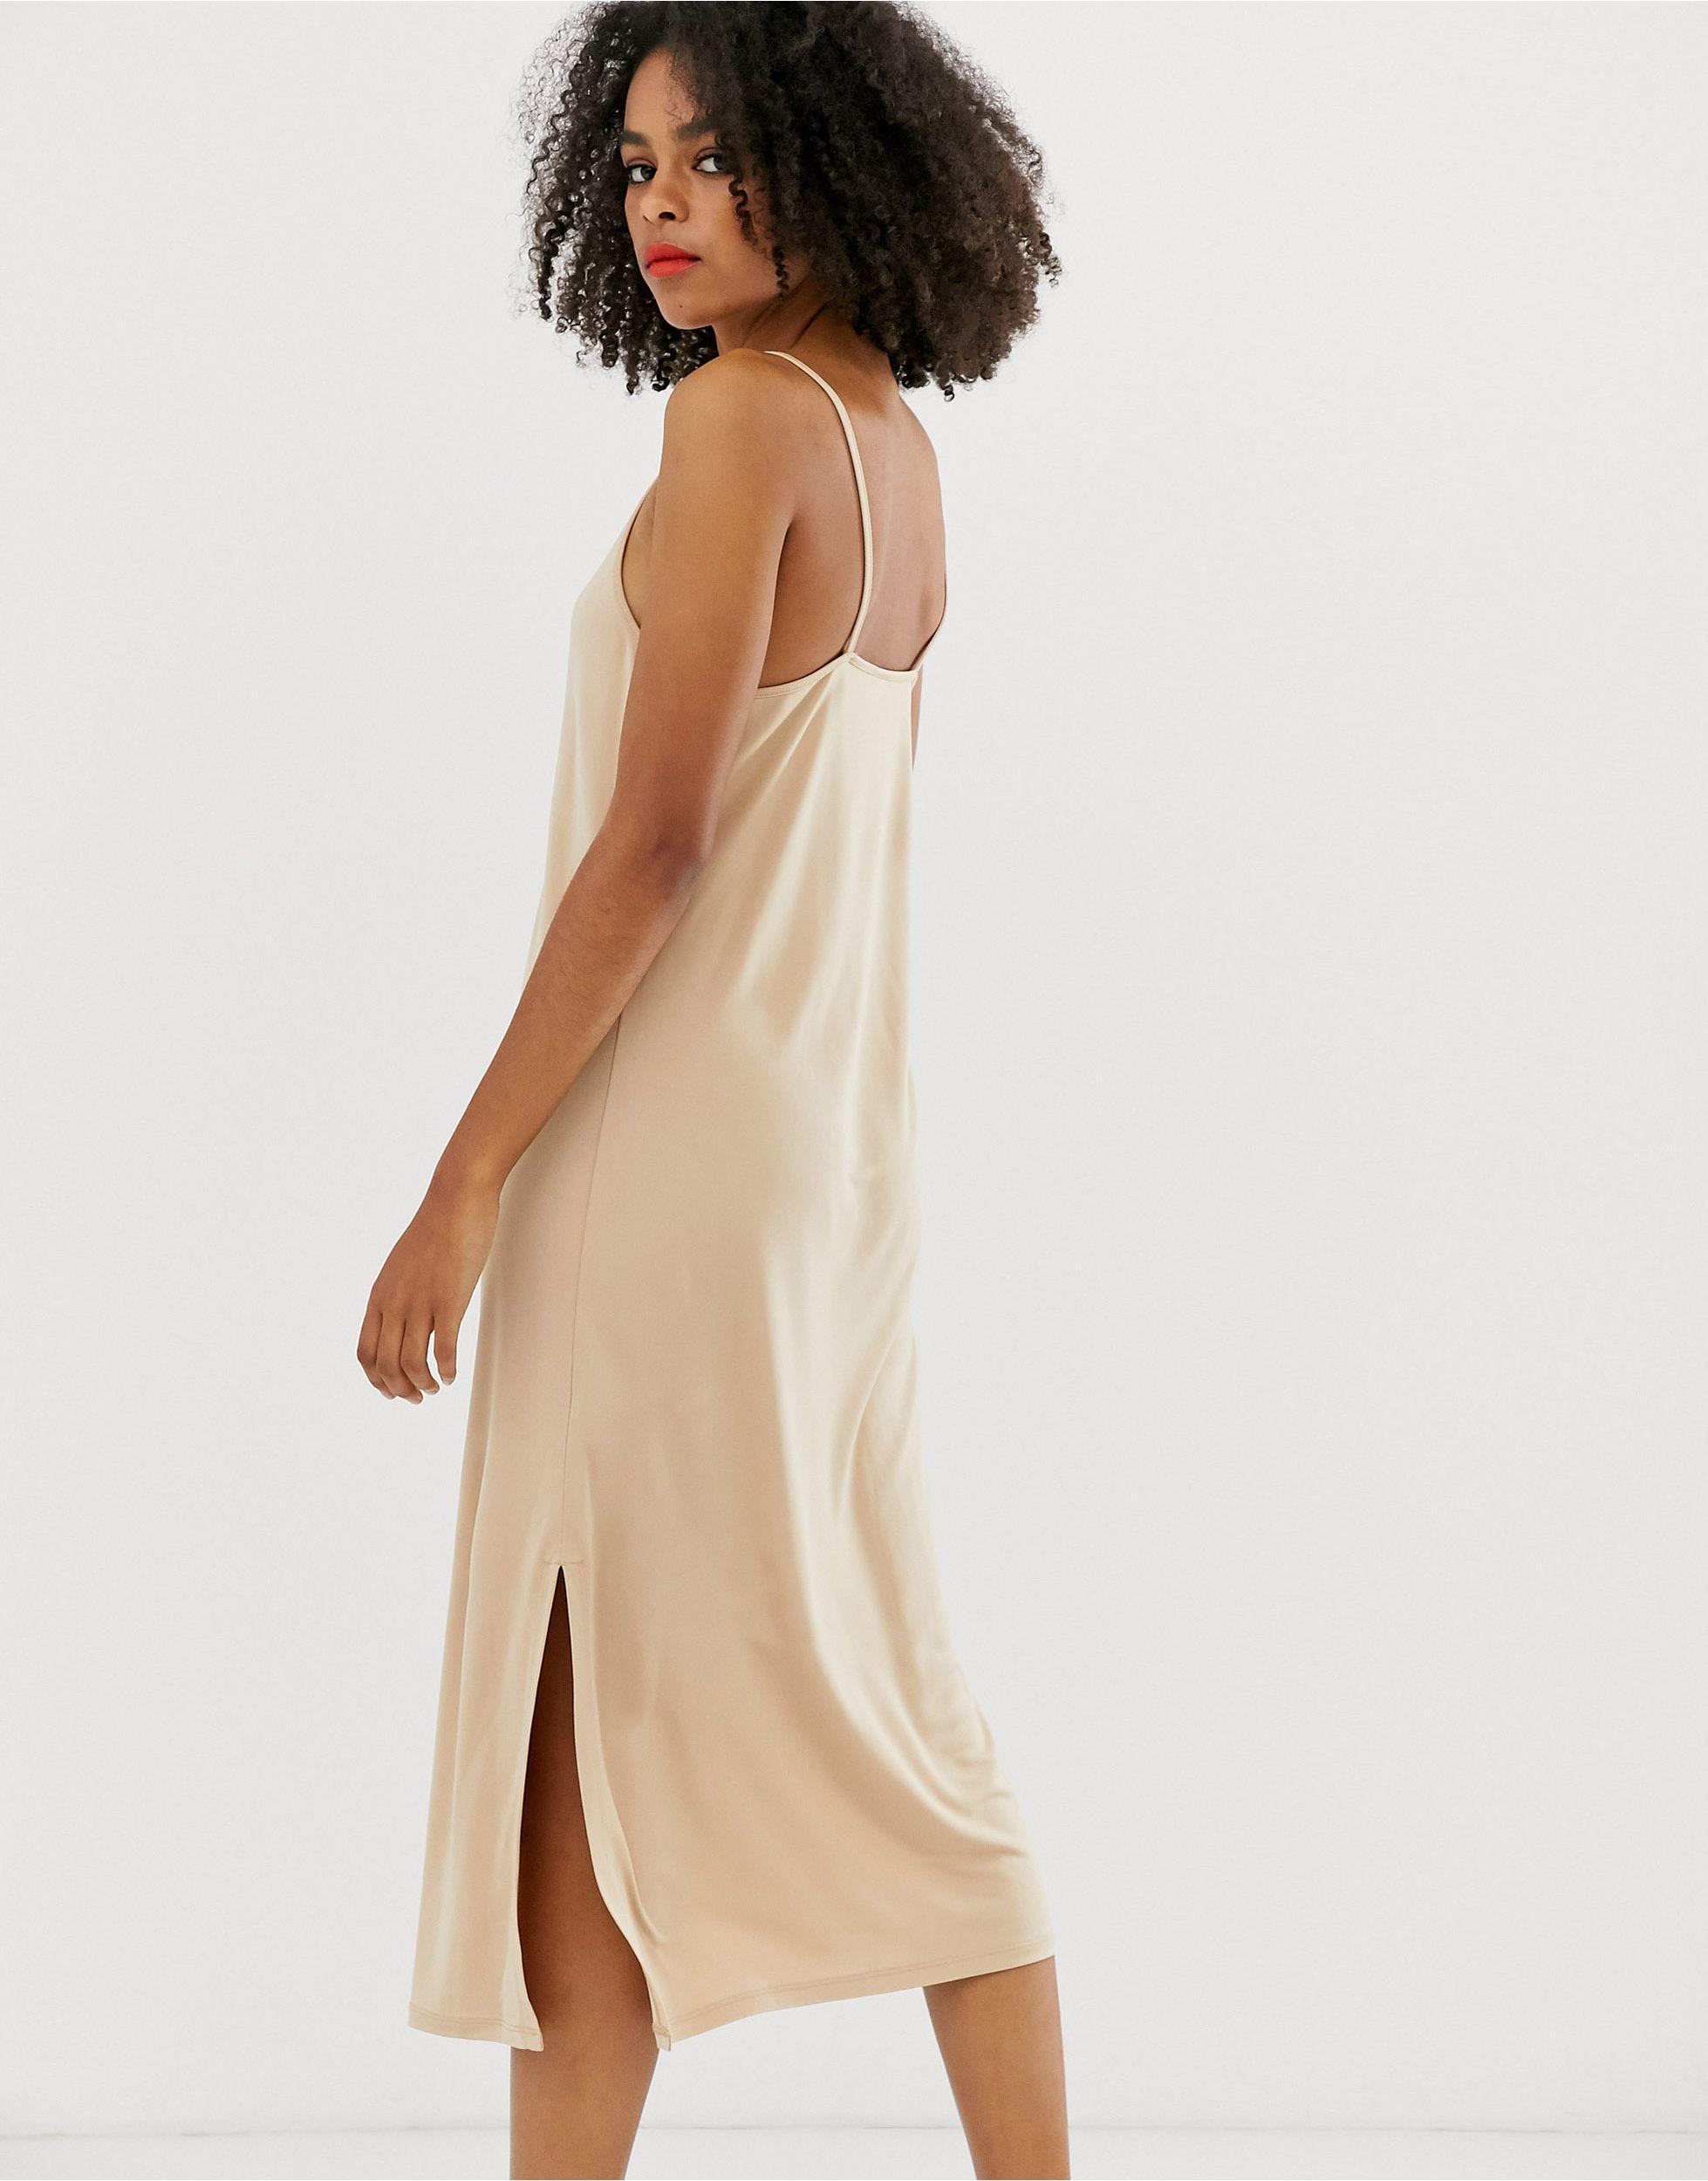 & Other Stories Square Neck Midi Slip Dress in Natural | Lyst